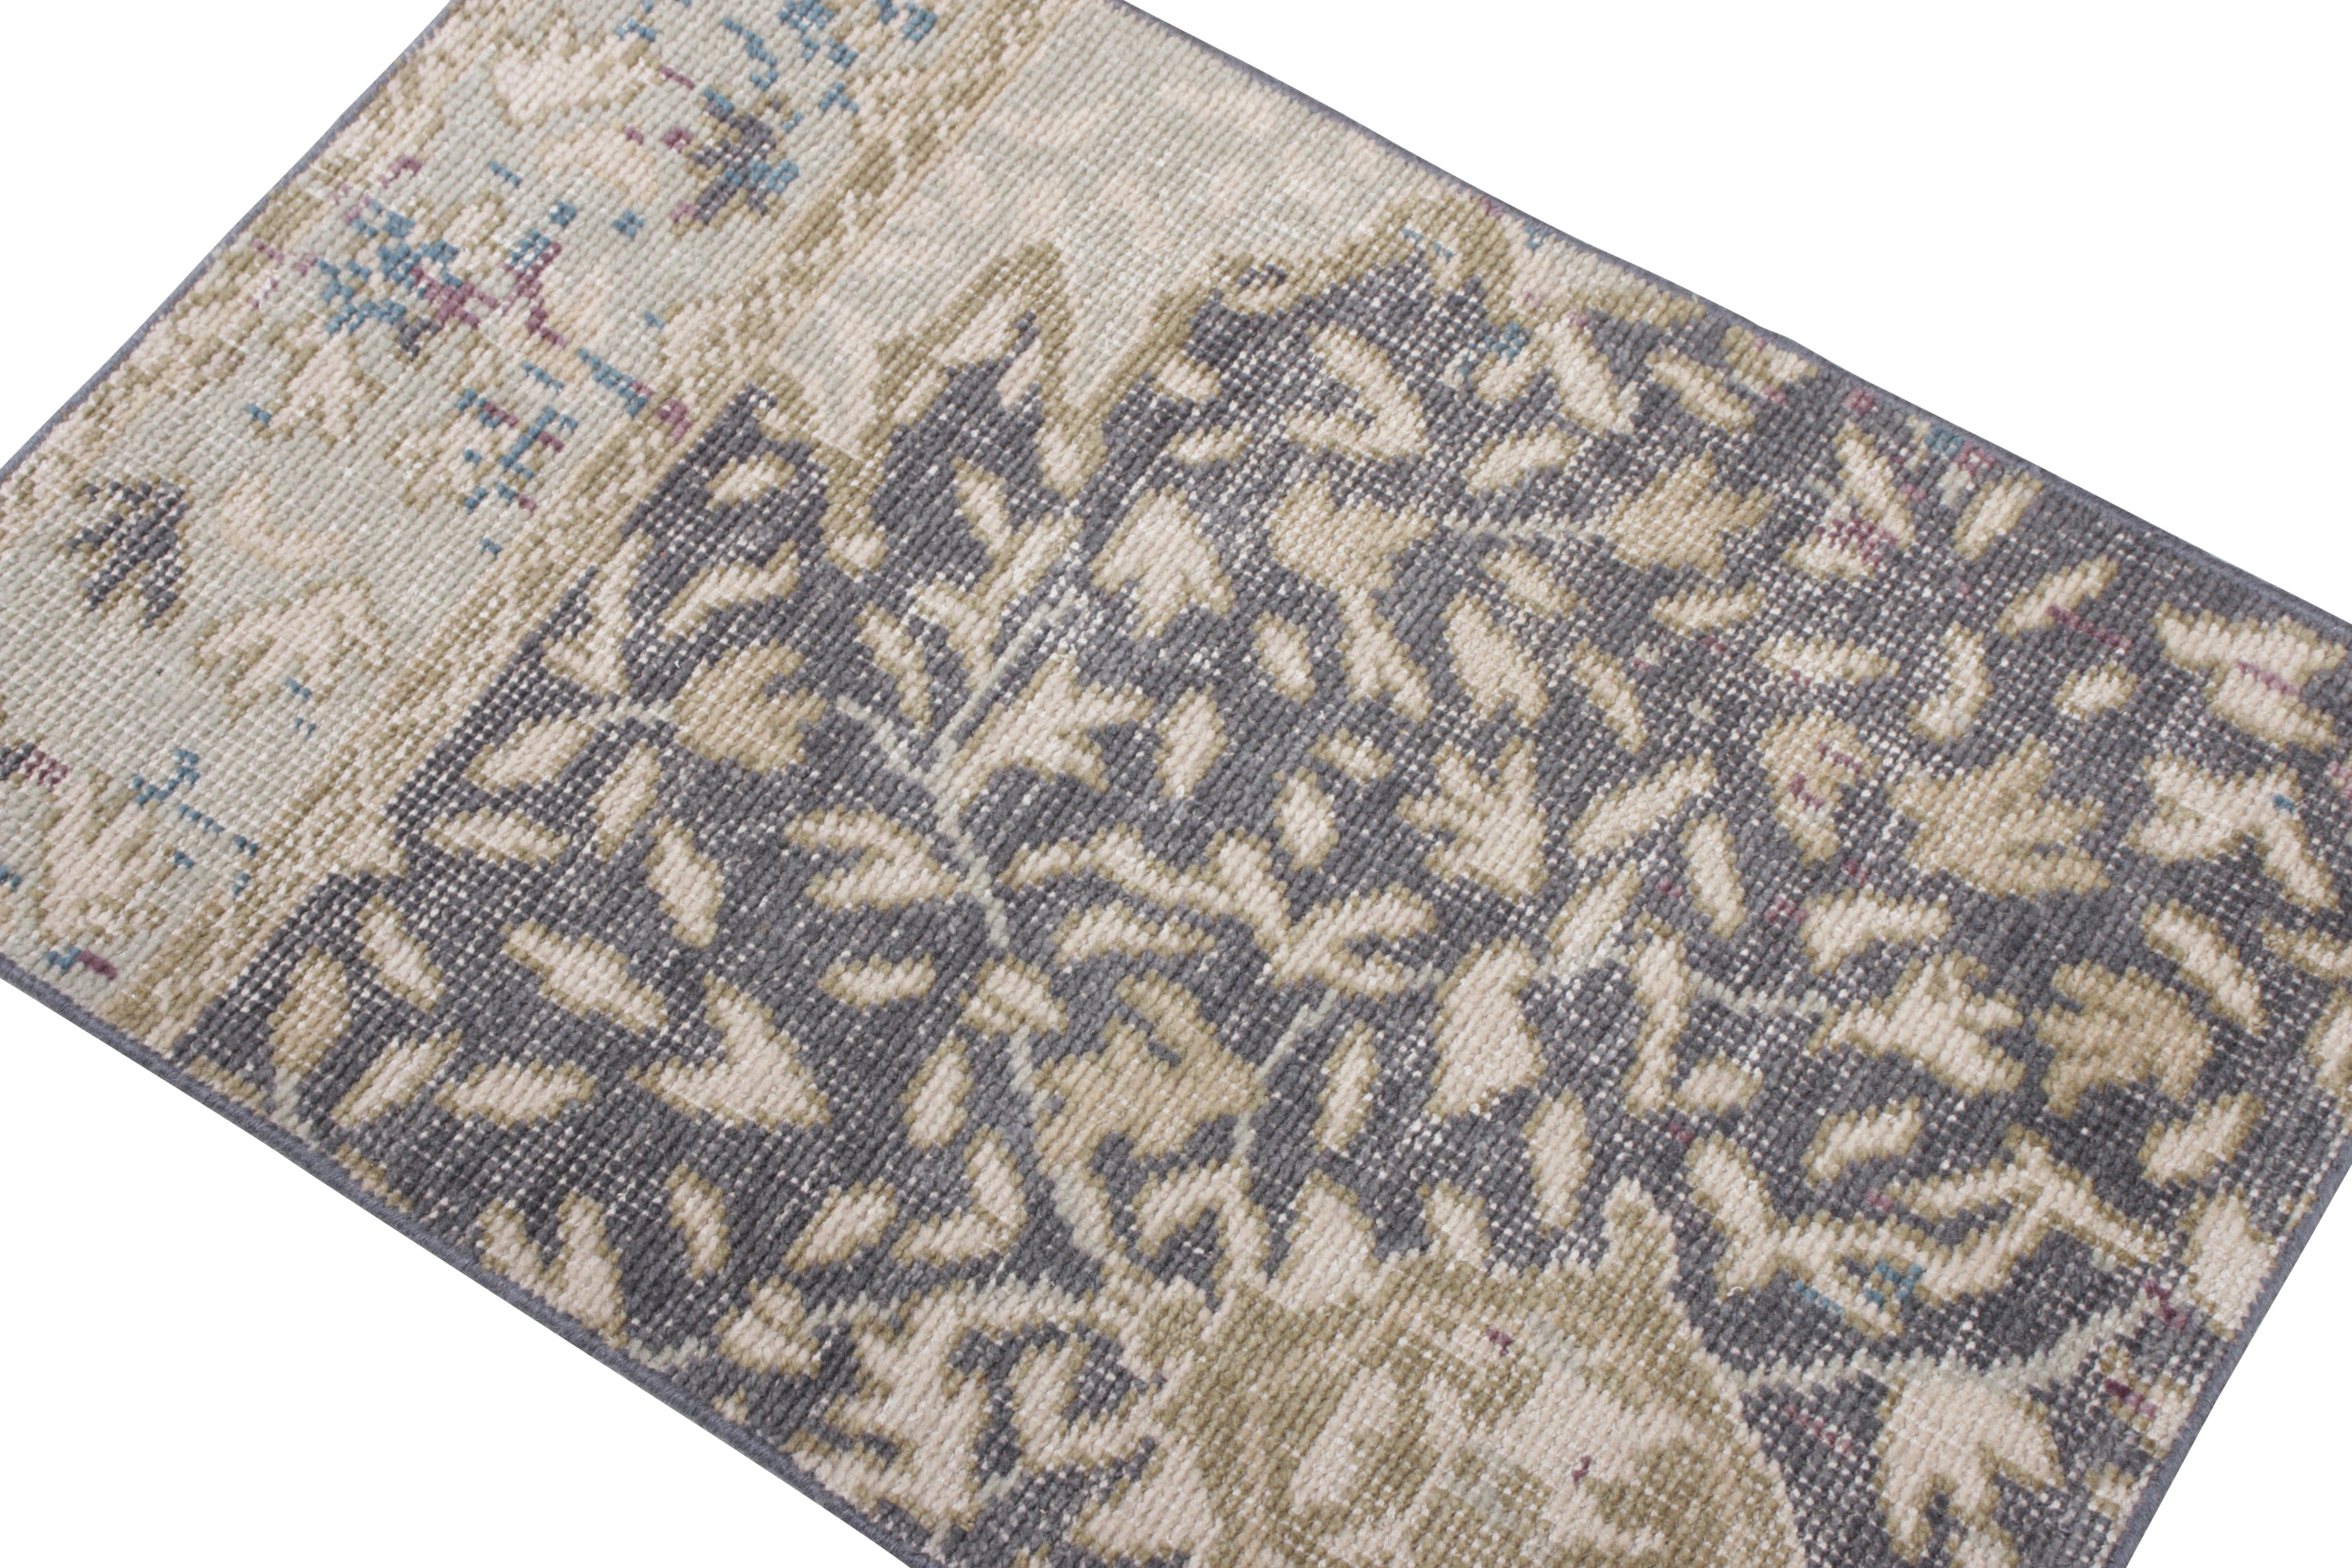 This 2x3 rug hails from the gift-size selections of Rug & Kilim’s Homage Collection, remarking a bold take on distressed style. This design evokes classic Persian rug styles in a rustic play of beige-brown floral patterns and blue undertones.  

An